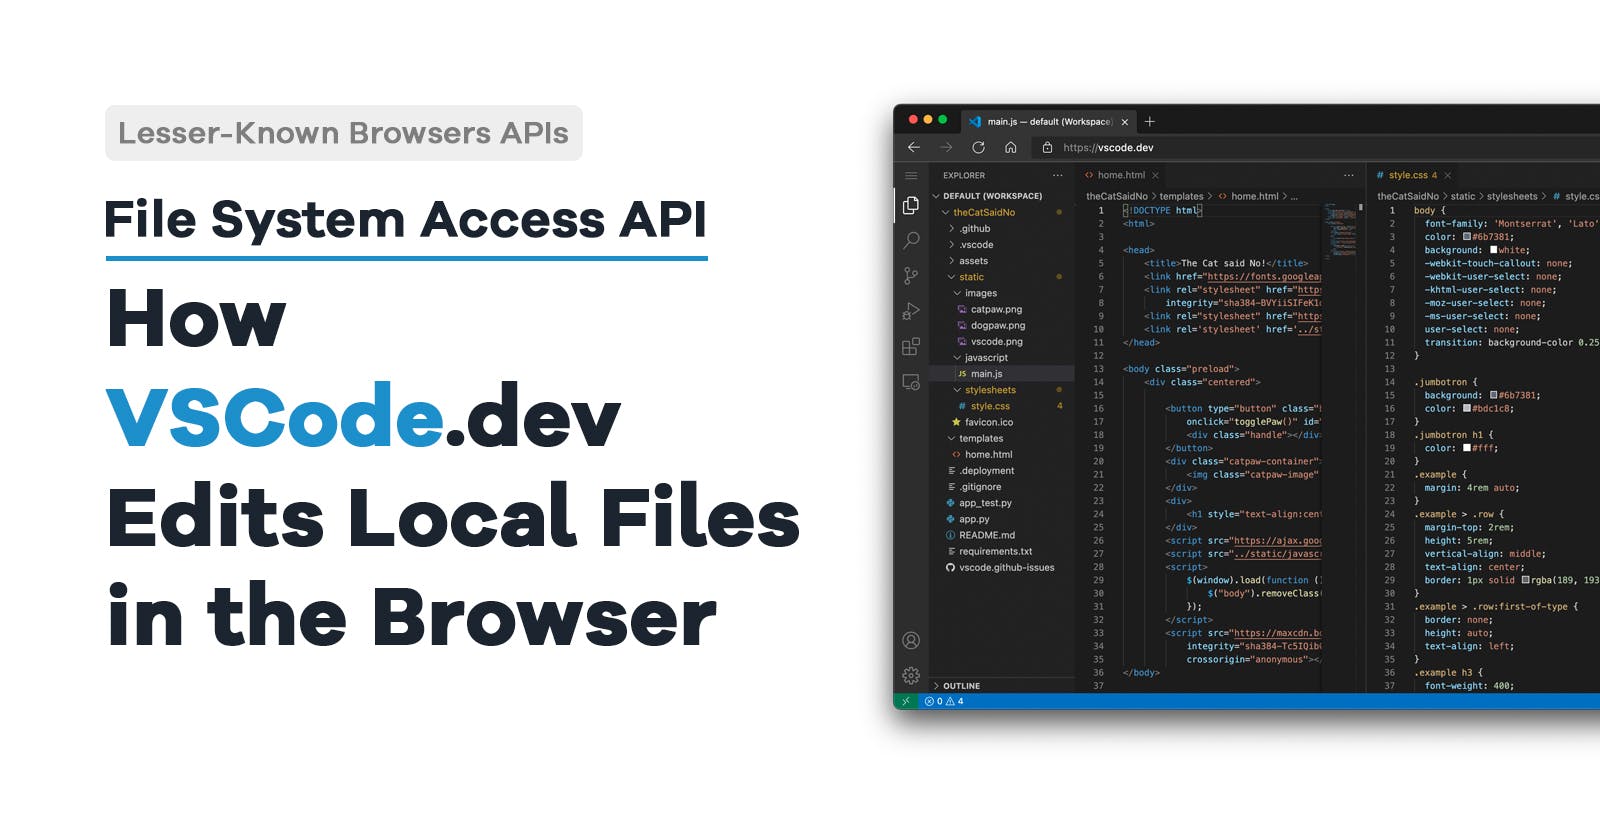 File System Access API: How VSCode.dev Edits Local Files in the Browser